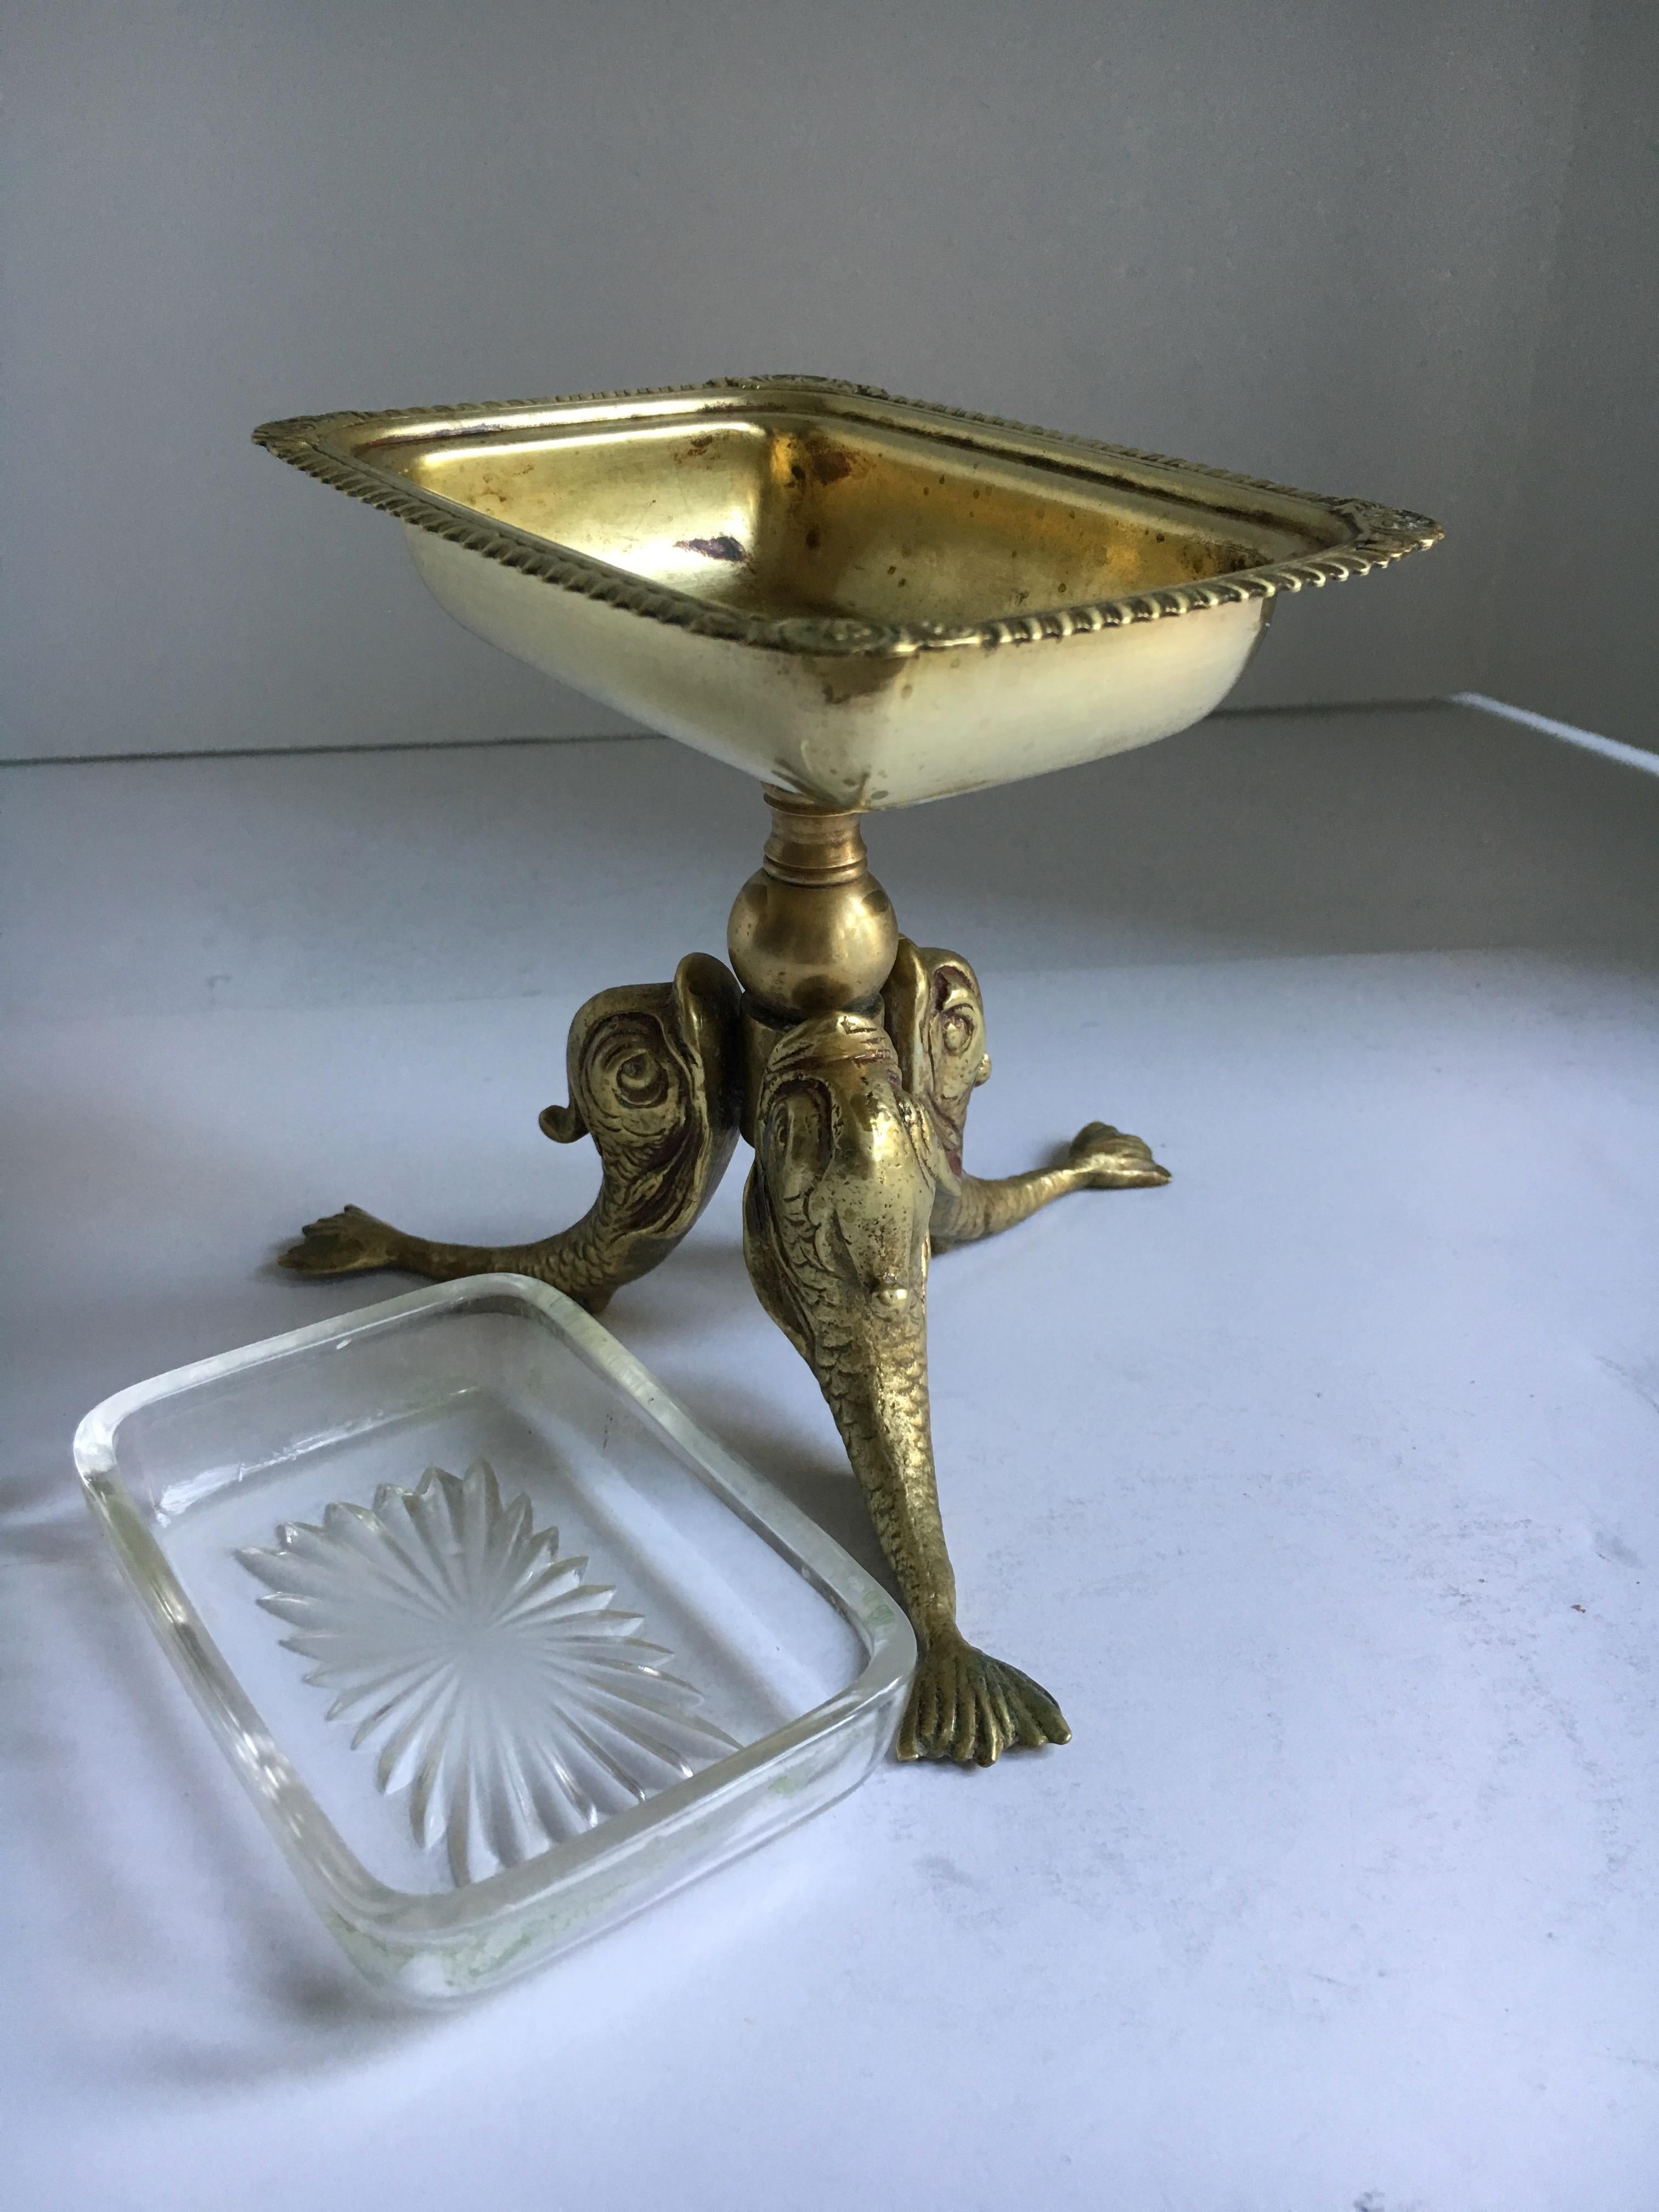 Exquisite and beautiful, three brass dolphin's supporting a soap dish - or is it Use this piece for business cards, or anything from candy - rubber bands - heavy and substantial - well made and a true beauty.